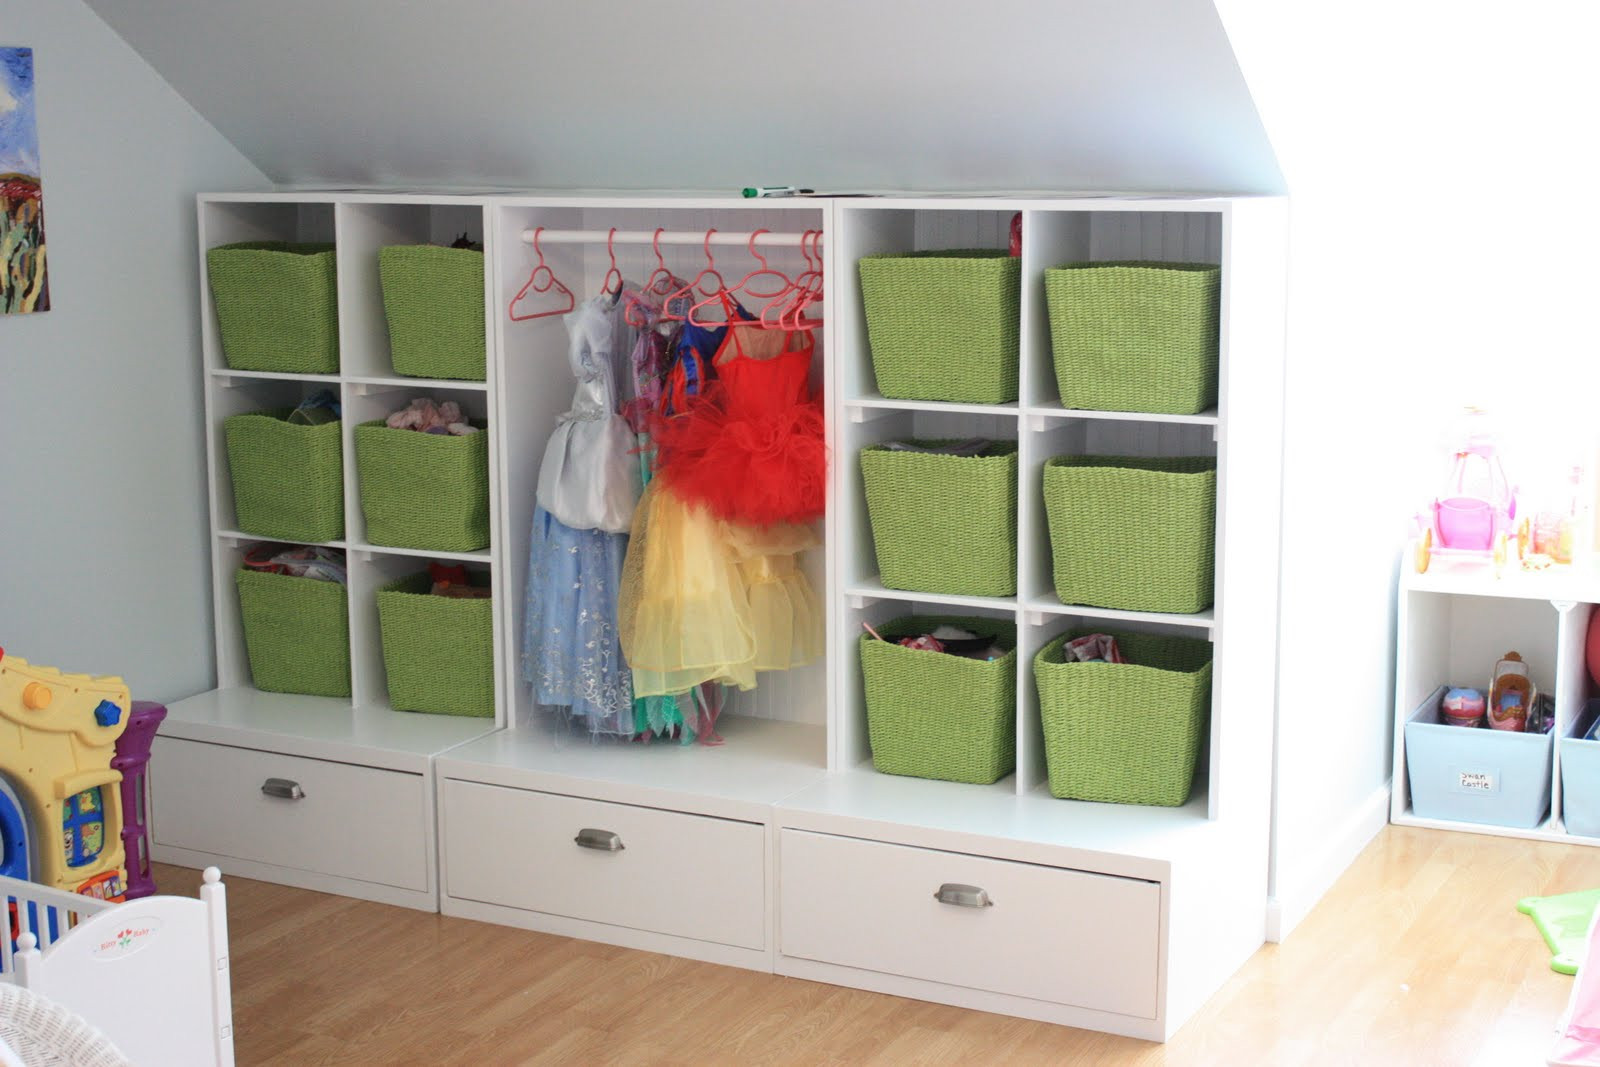 Kids Bedrooms Storage
 Trey and Abby My Playroom Storage Solution